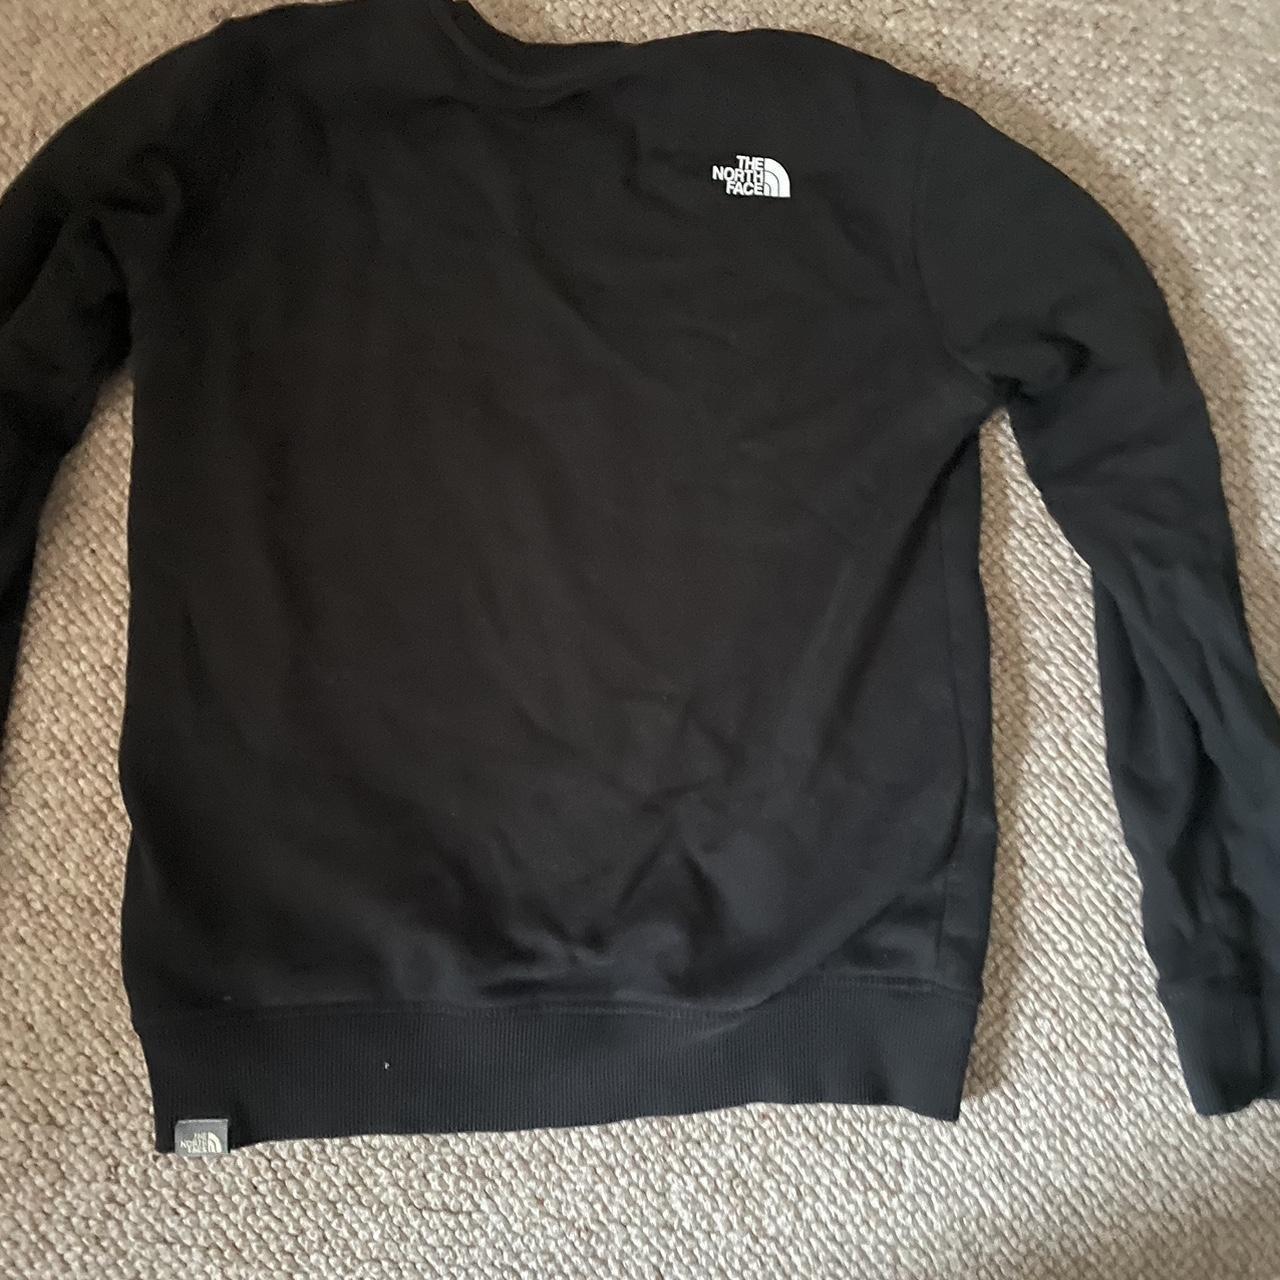 The North face jumper Size small Perfect condition - Depop